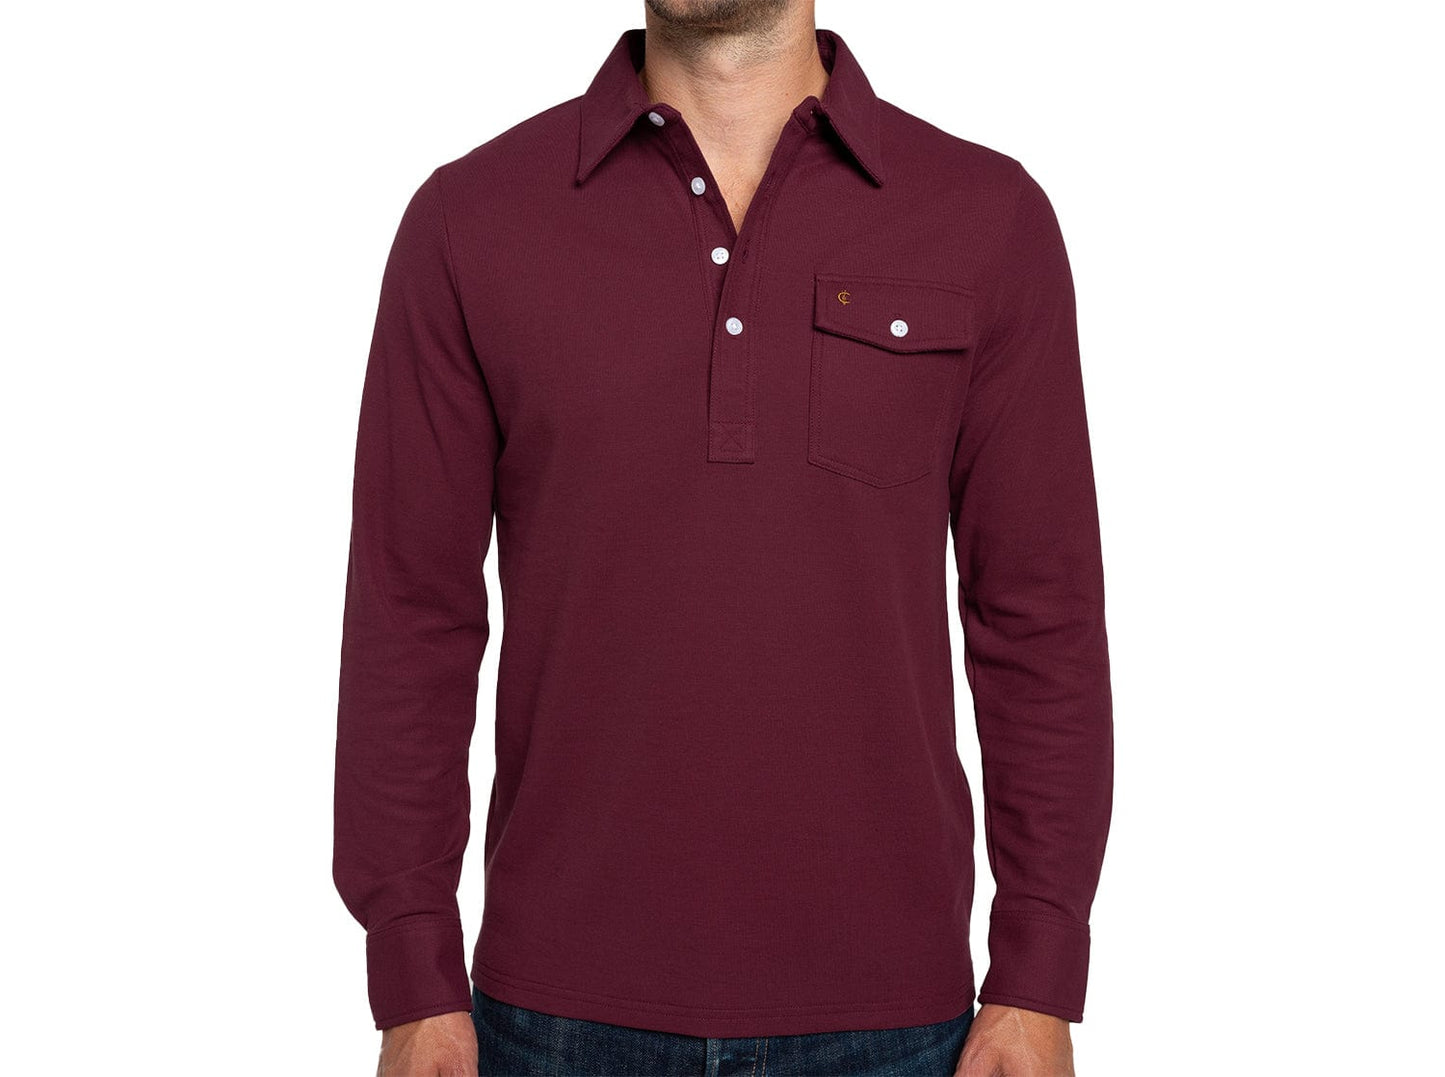 Long Sleeve Players Shirt - Mulled Wine